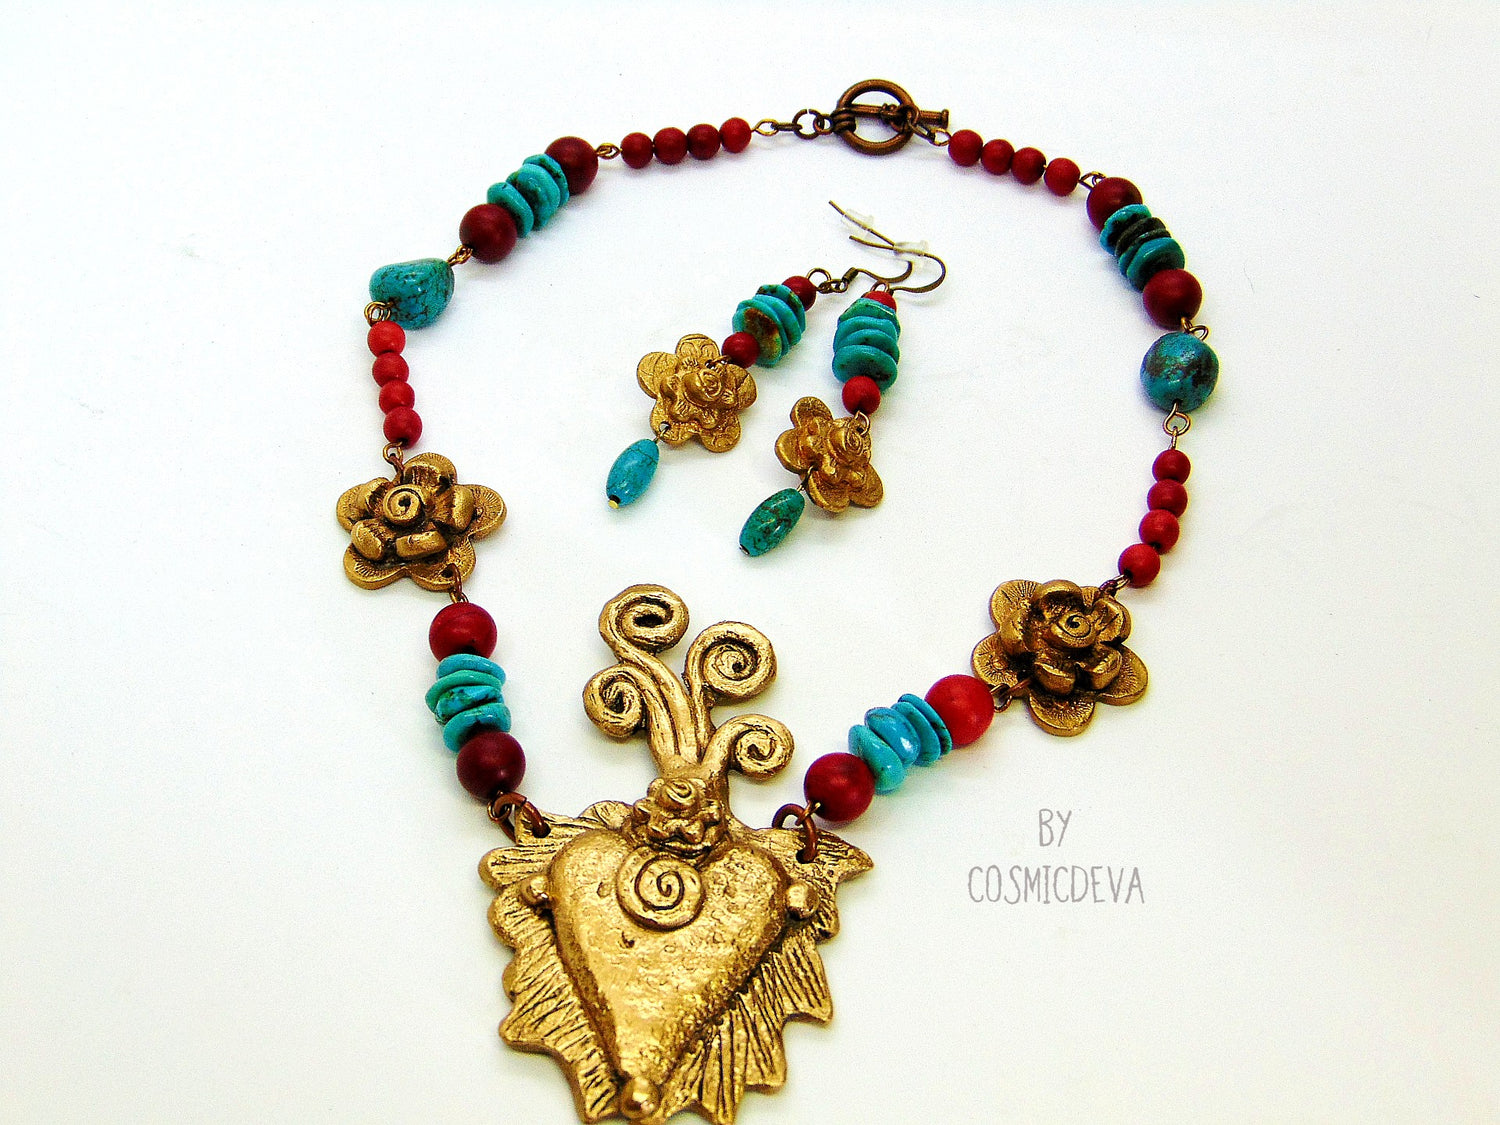 Gold Bronze Milagro Heart  Sacred Heart Necklace Set. Stunning bold one of a kind hand sculptured solid golden bronze milagro heart and flower necklace set with natural turquoise, red howlite gemstone beads was kiln fired in my studio with pure Bronze from Bronze Metal Clay.   This necklace comes with a matching pair of ear rings- CosmicDeva